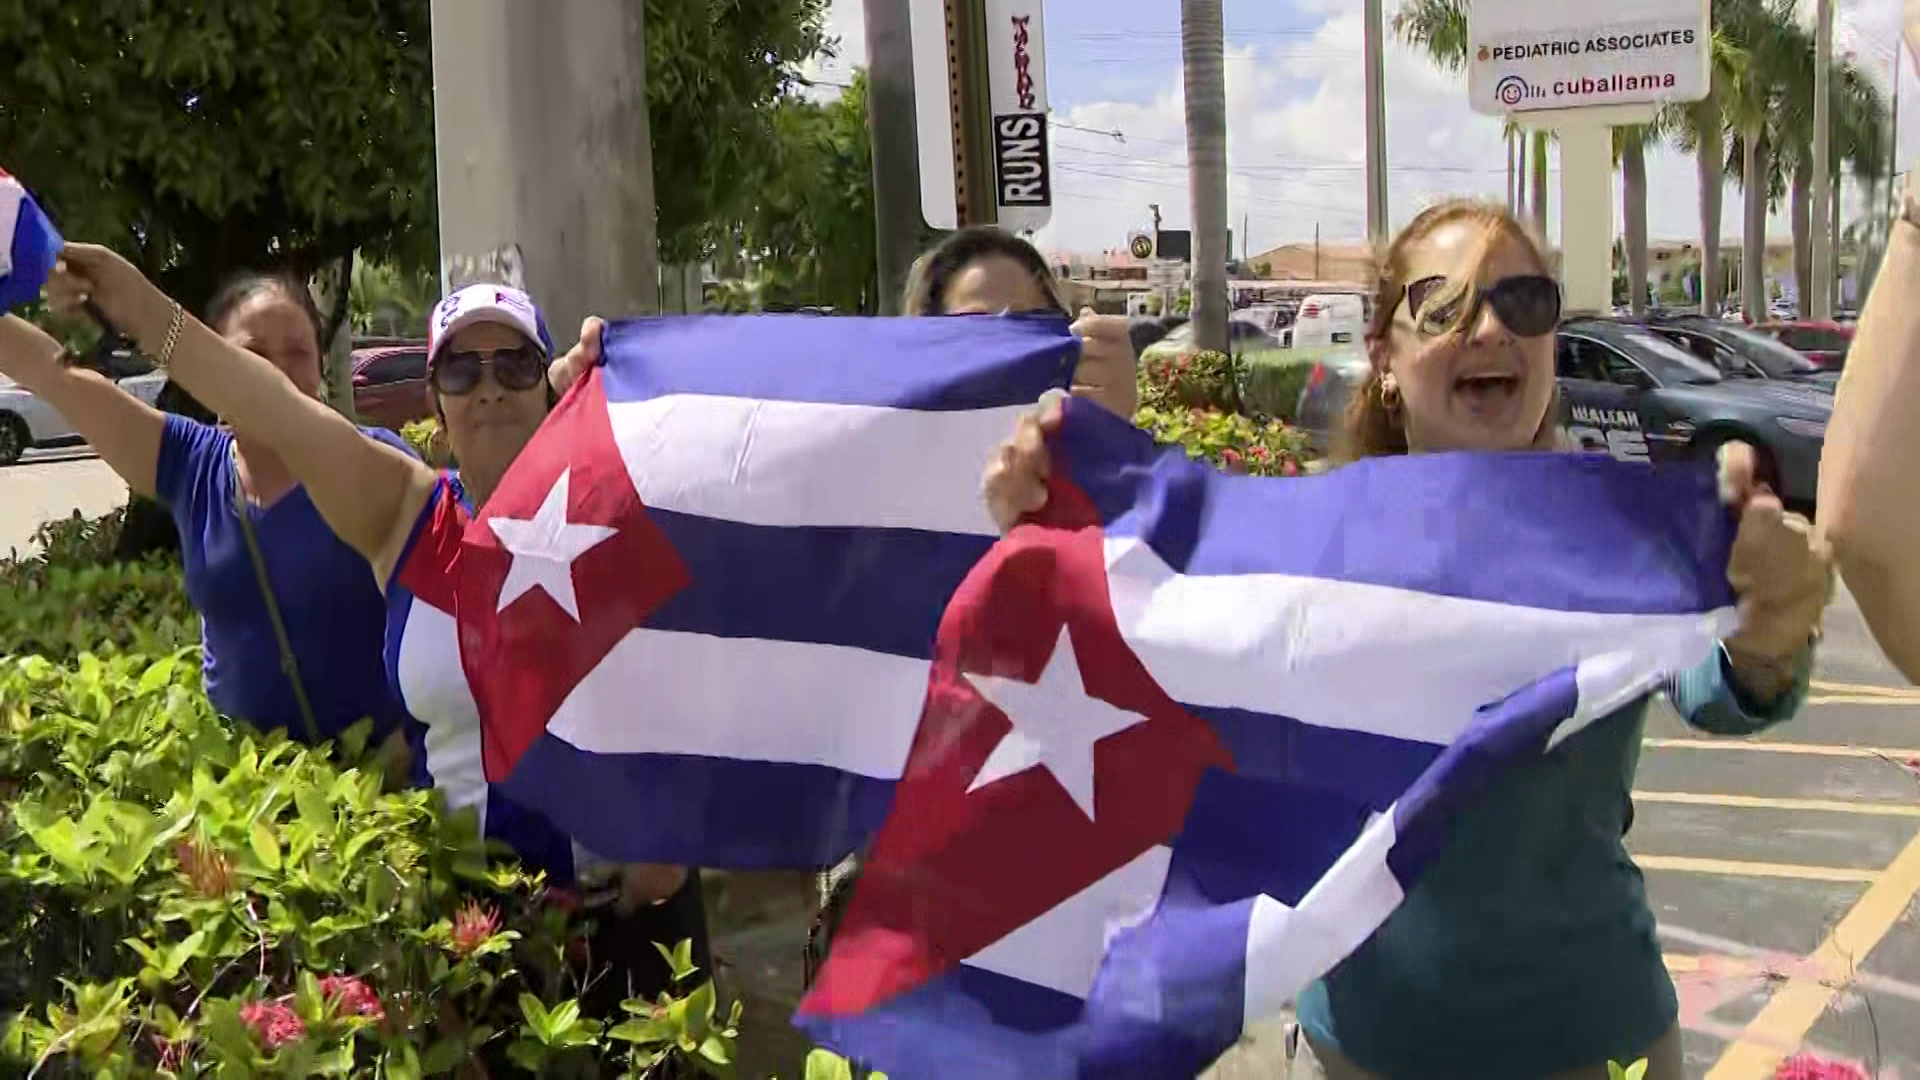 People Gather To Rally For A Free Cuba In Hialeah